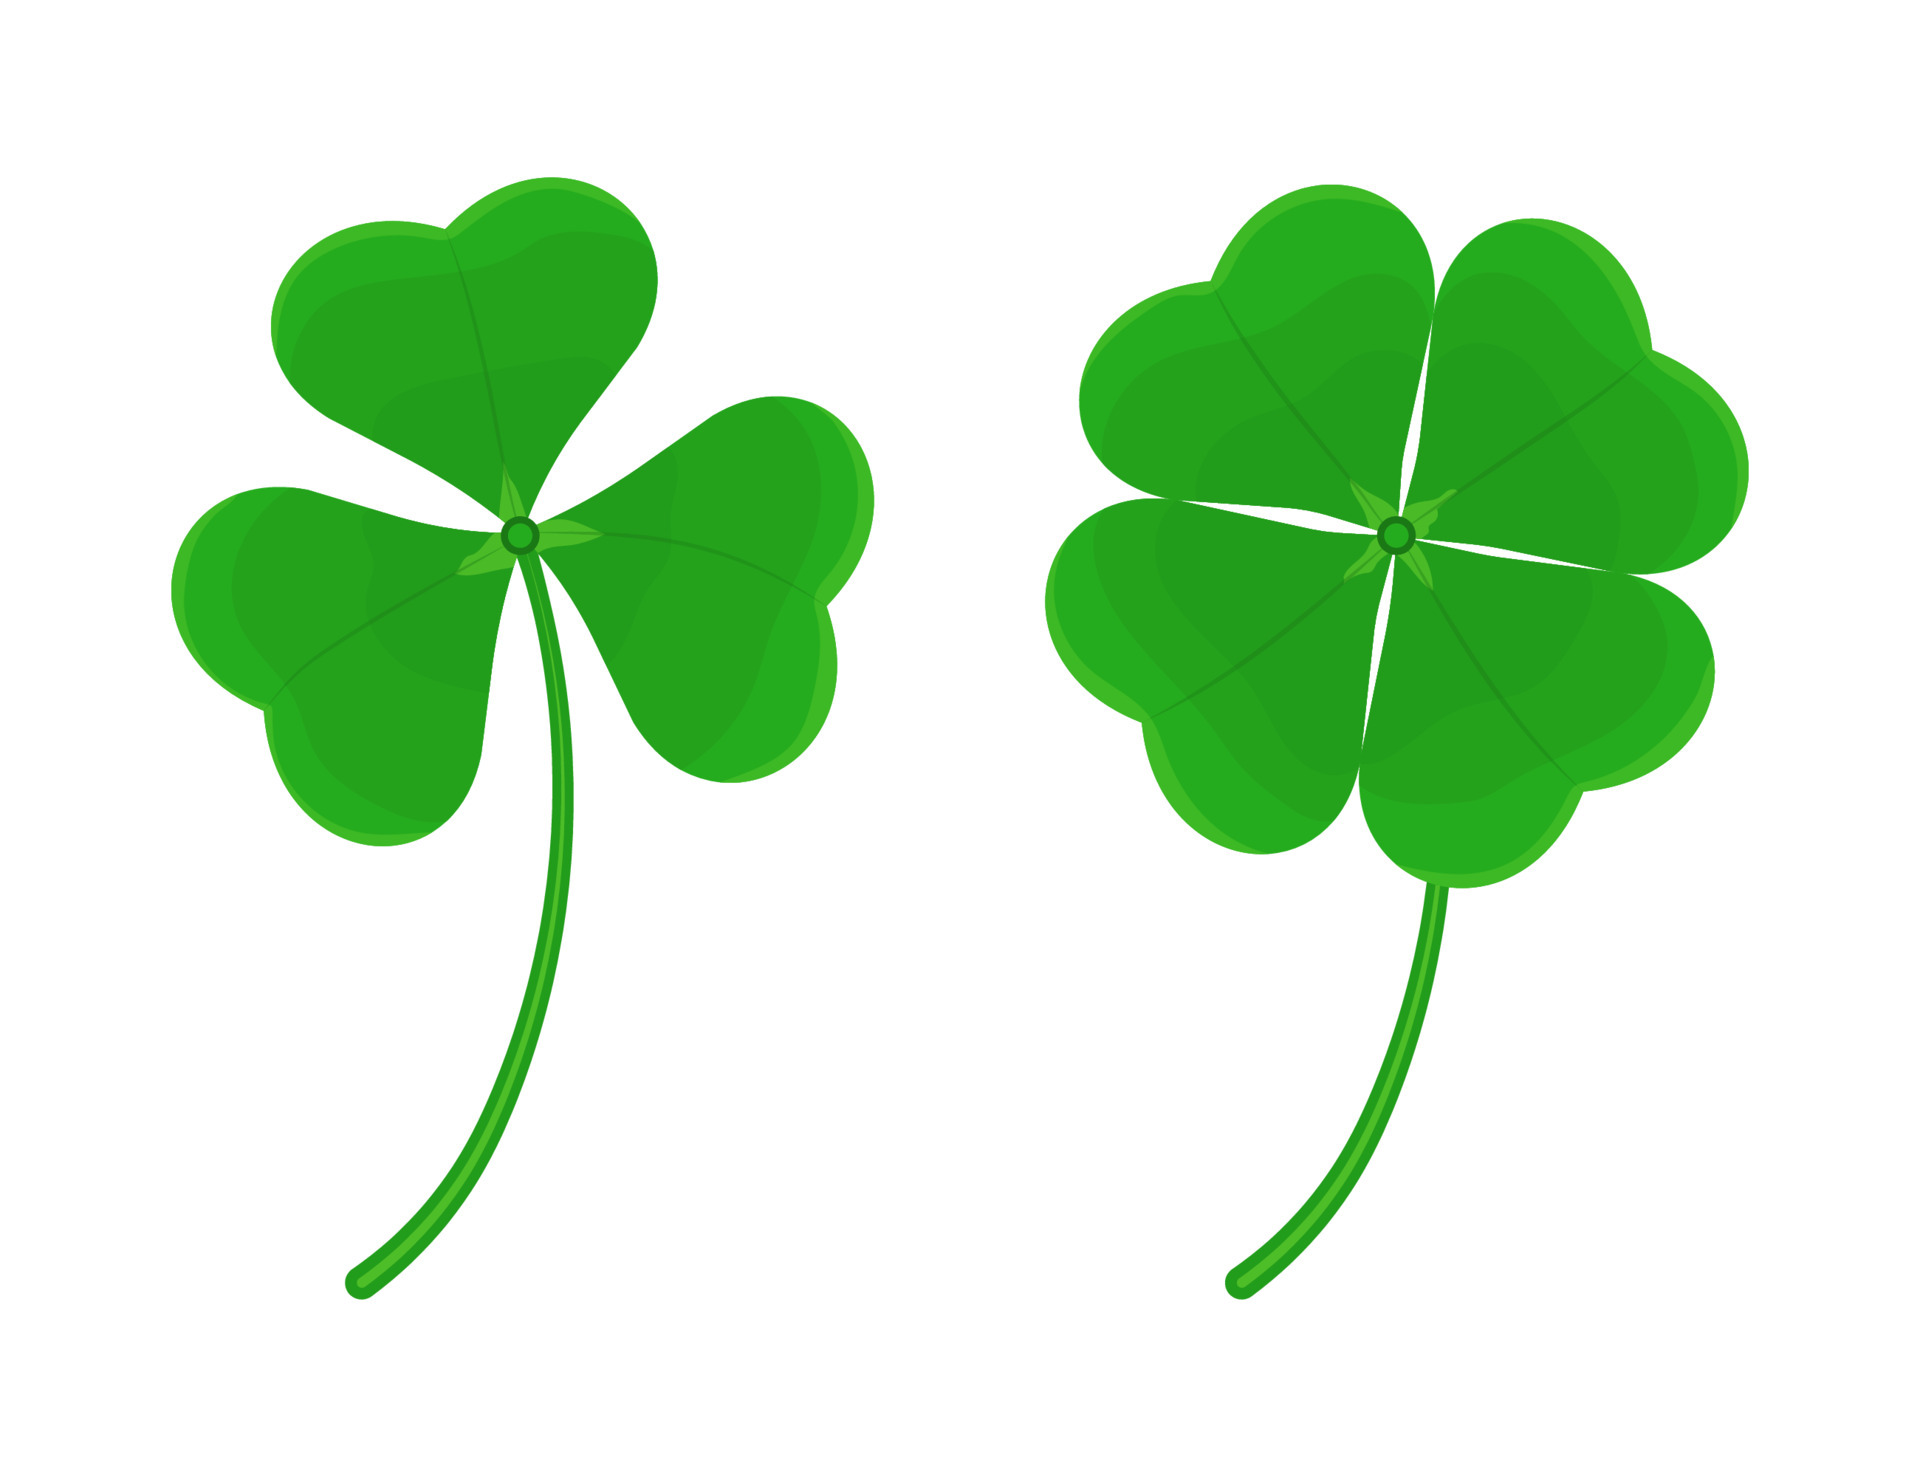 https://static.vecteezy.com/system/resources/previews/005/597/447/original/clover-with-three-and-four-leaves-good-luck-symbol-free-vector.jpg